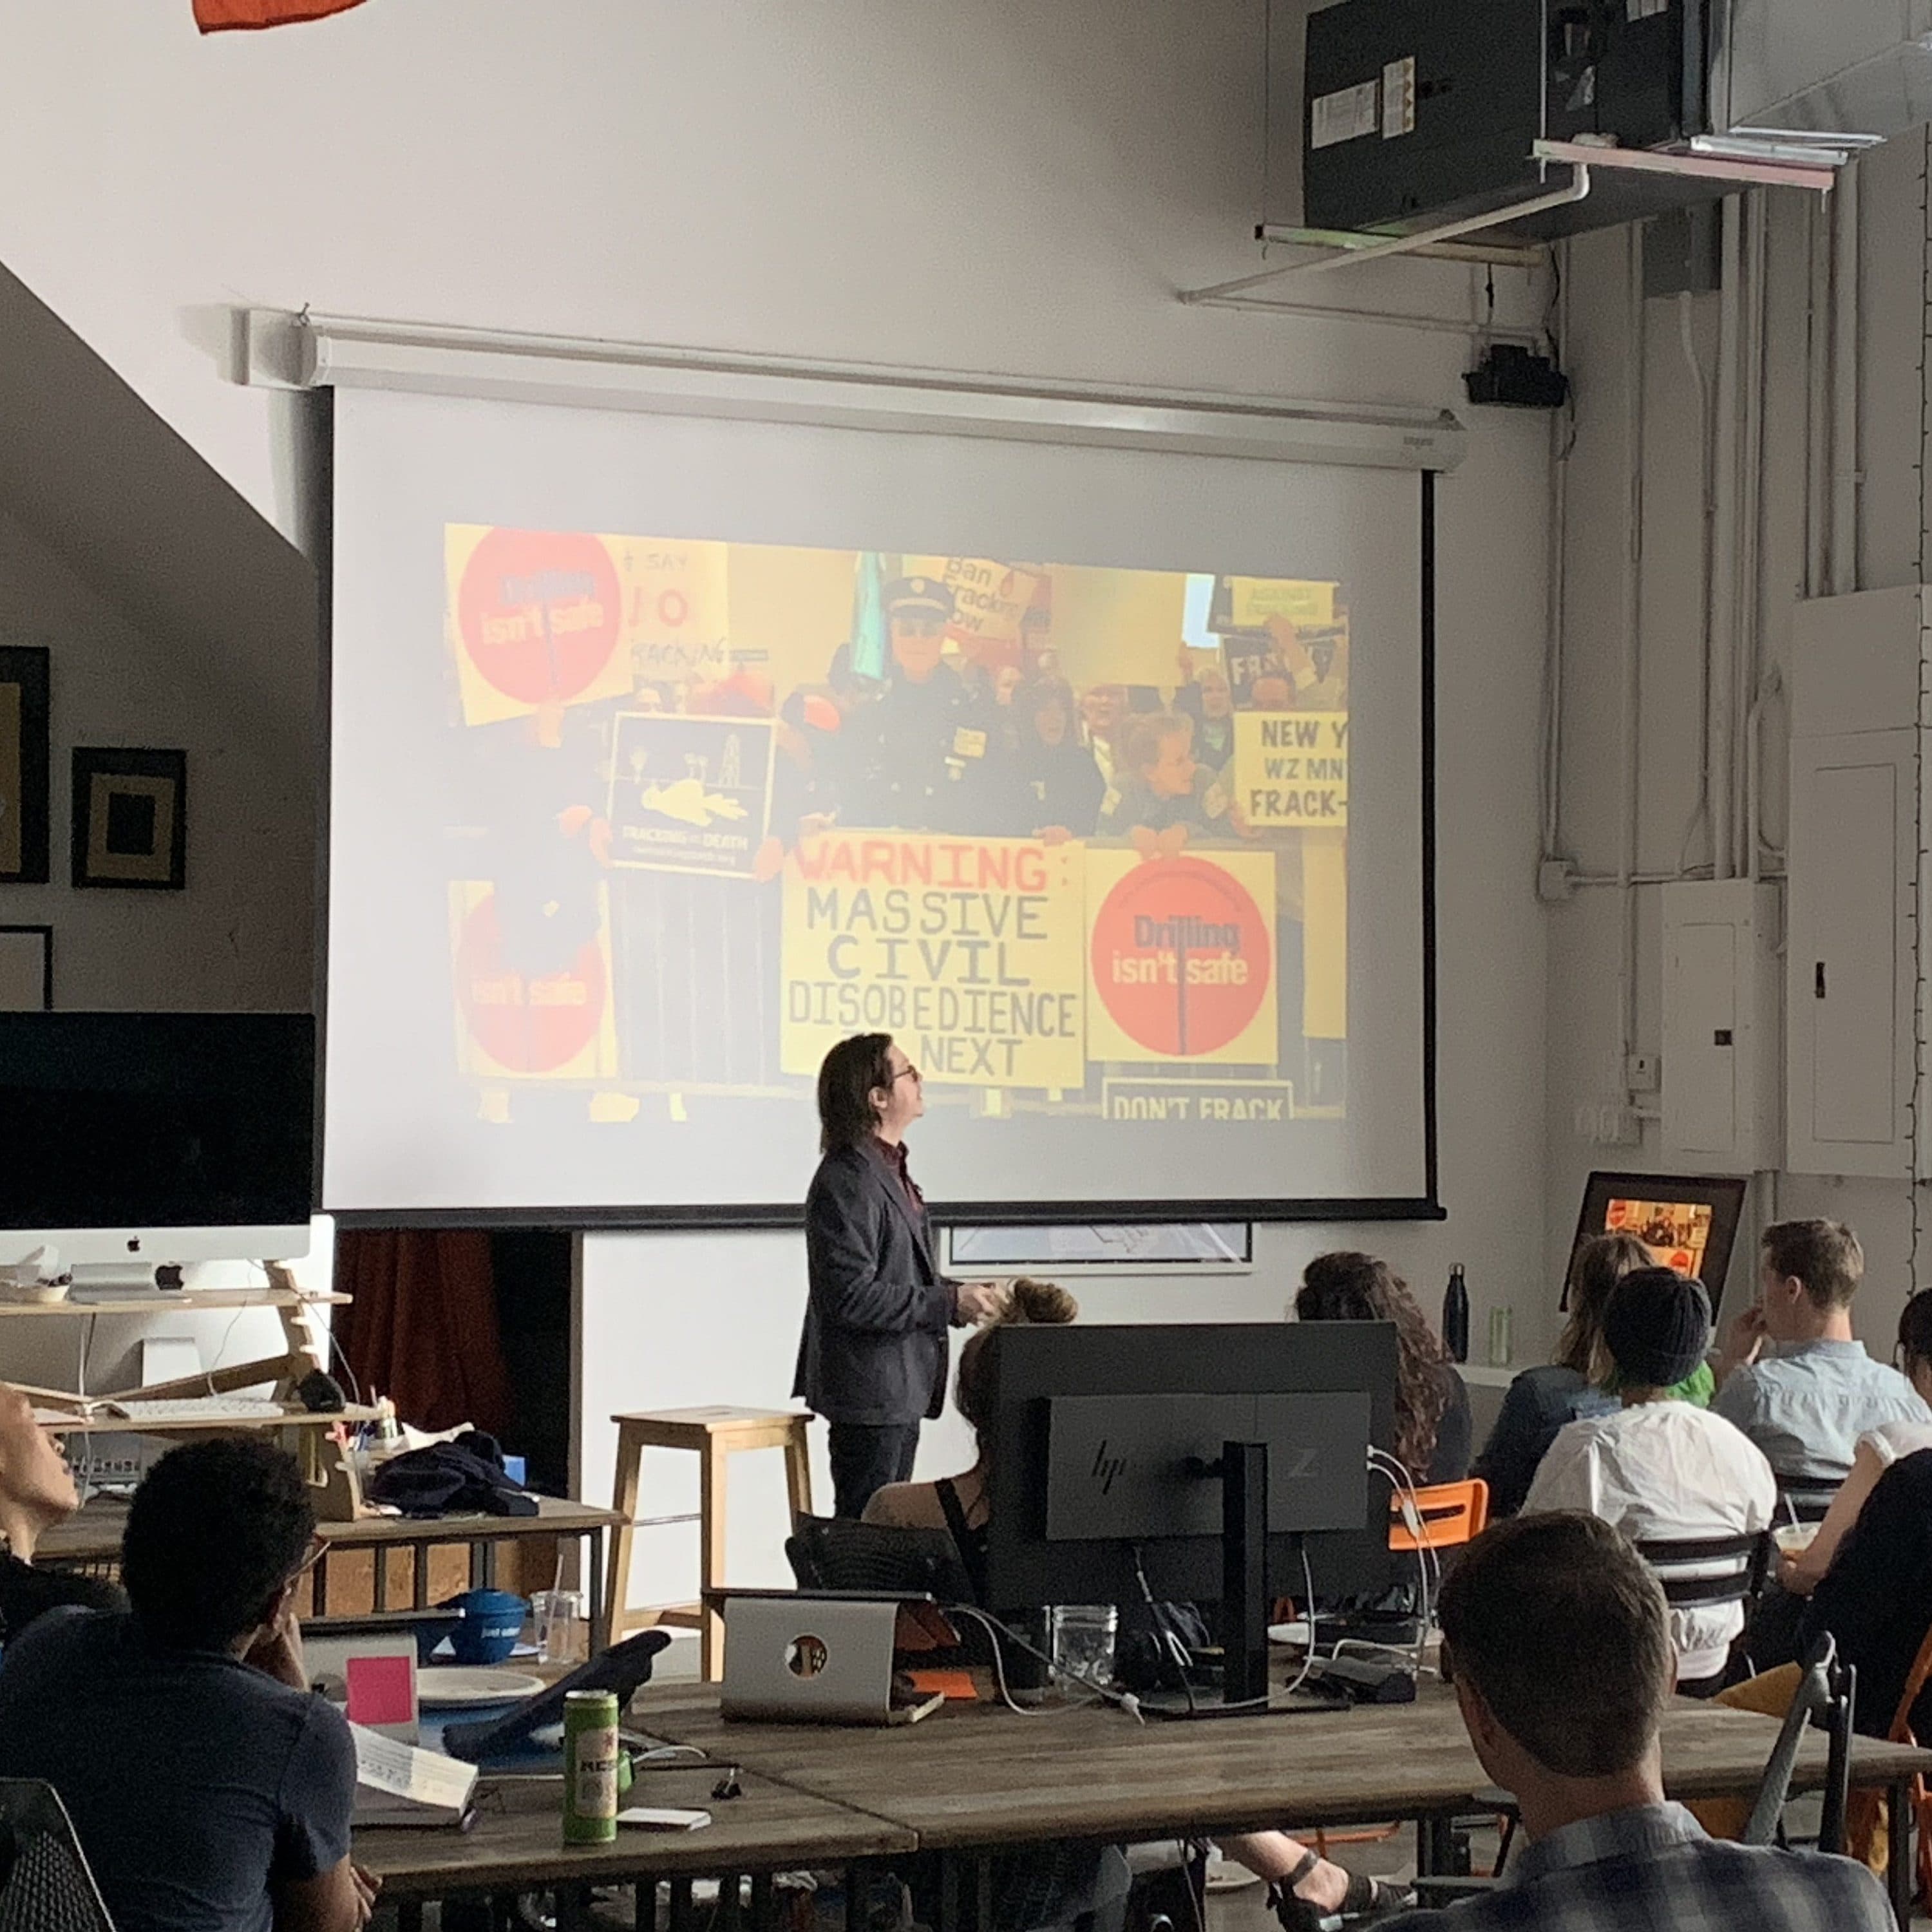 A person is presenting to an audience in a classroom setting. The presentation slide displays protest signs with messages like "Warning: Massive Civil Disobedience Next" and "Earth Isn't Safe." Various objects and artworks adorn the room.